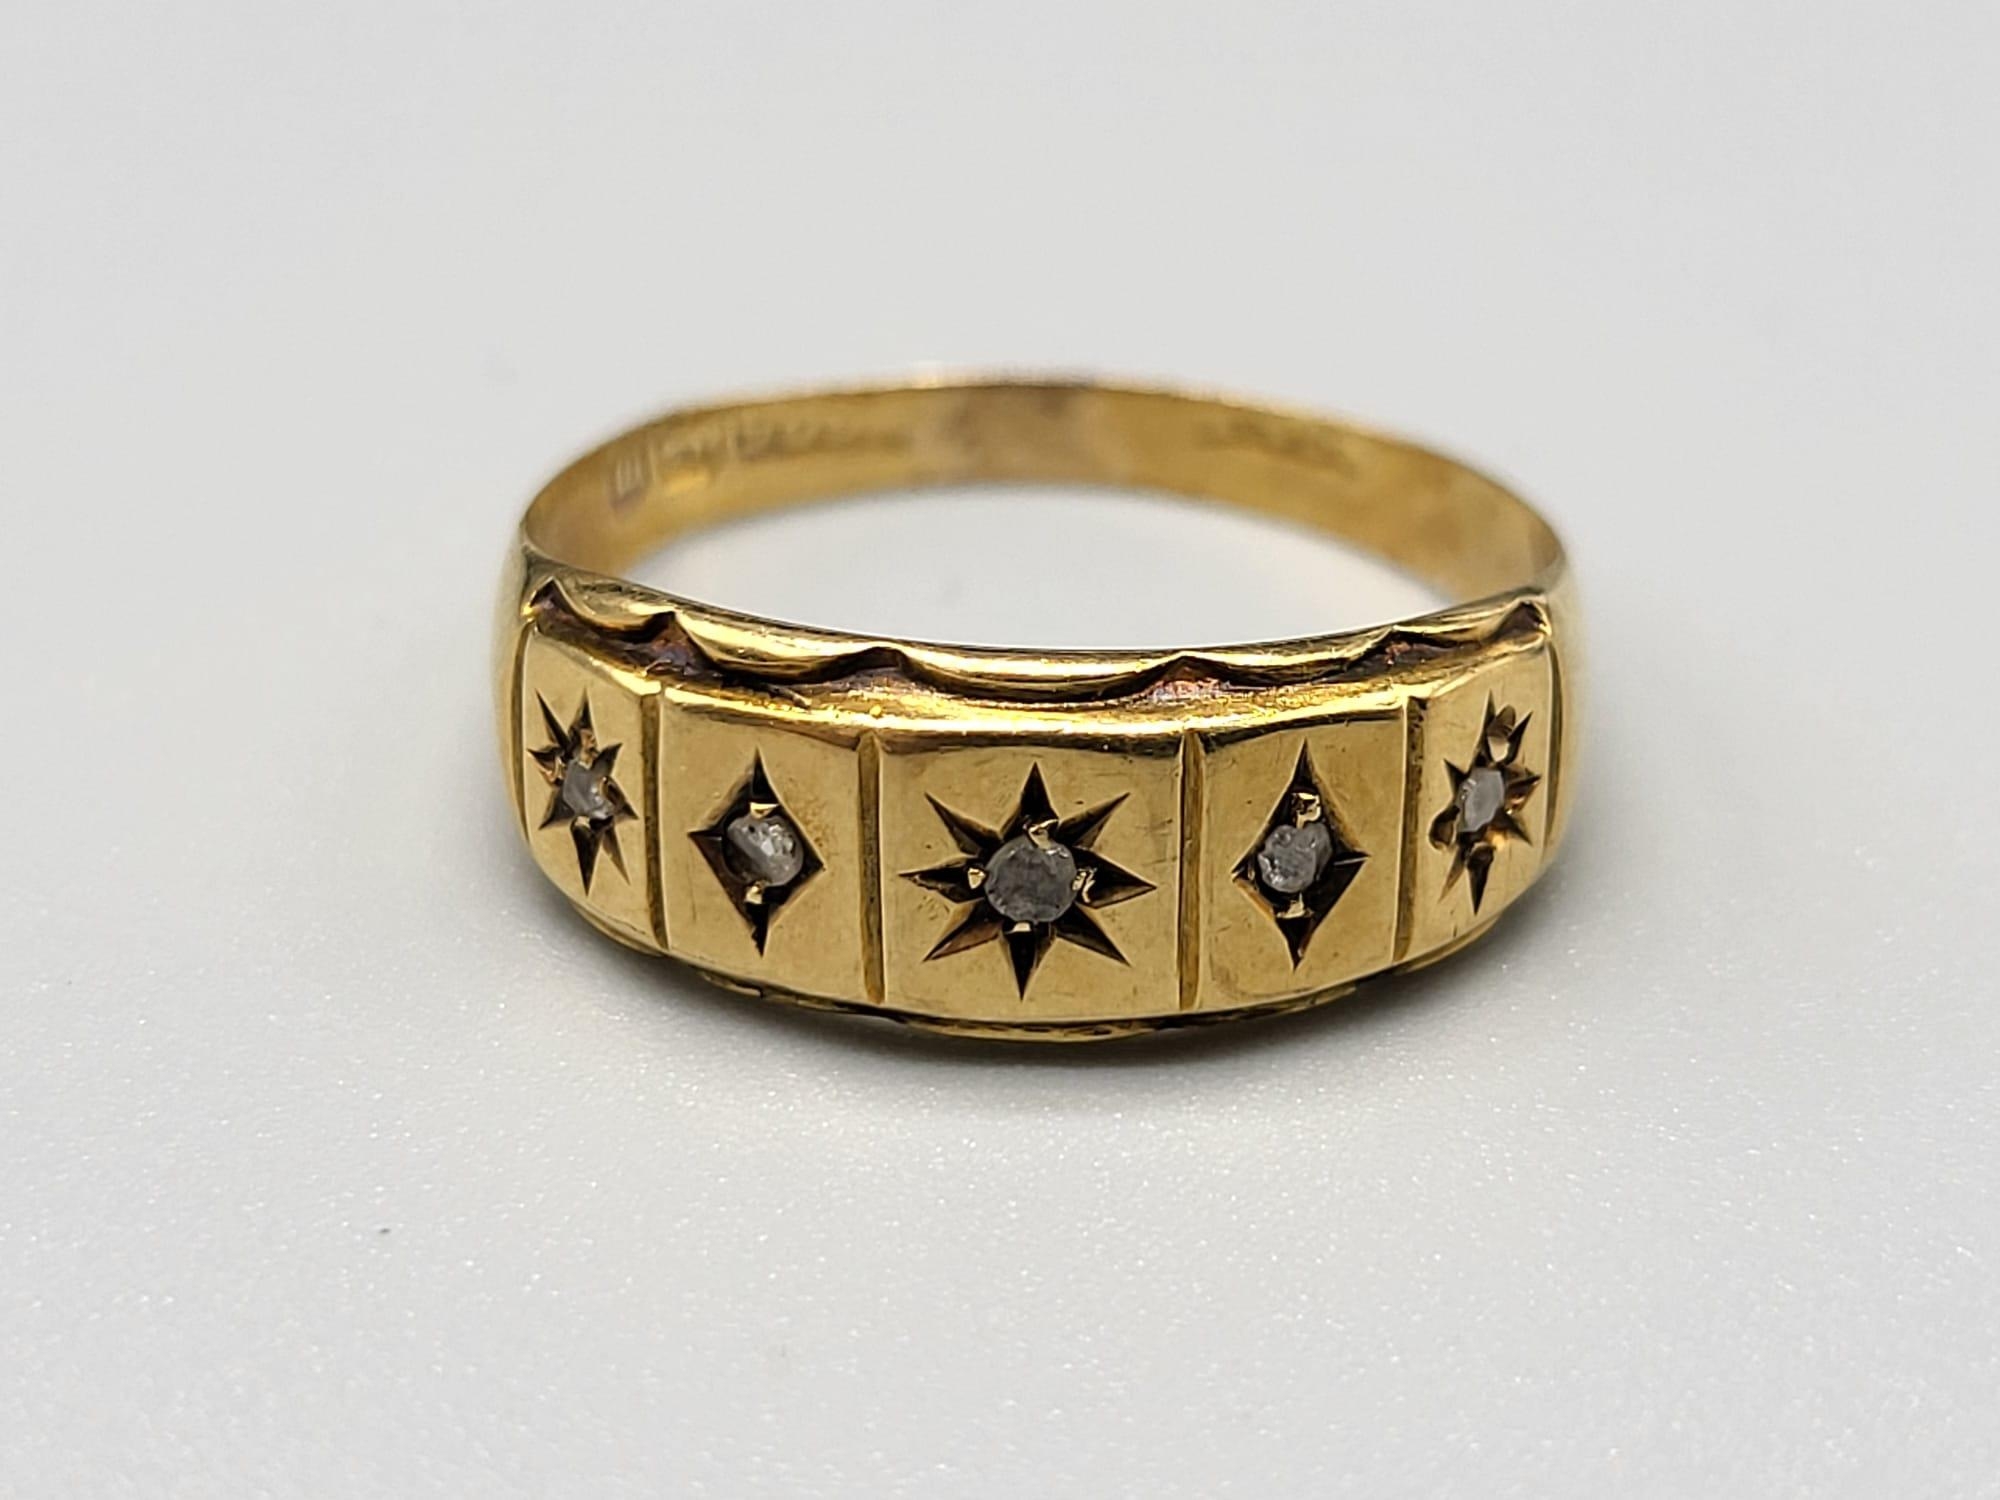 A 15 K yellow gold ring with five diamonds on top. Ring size: Q, weight: 1.9 g.